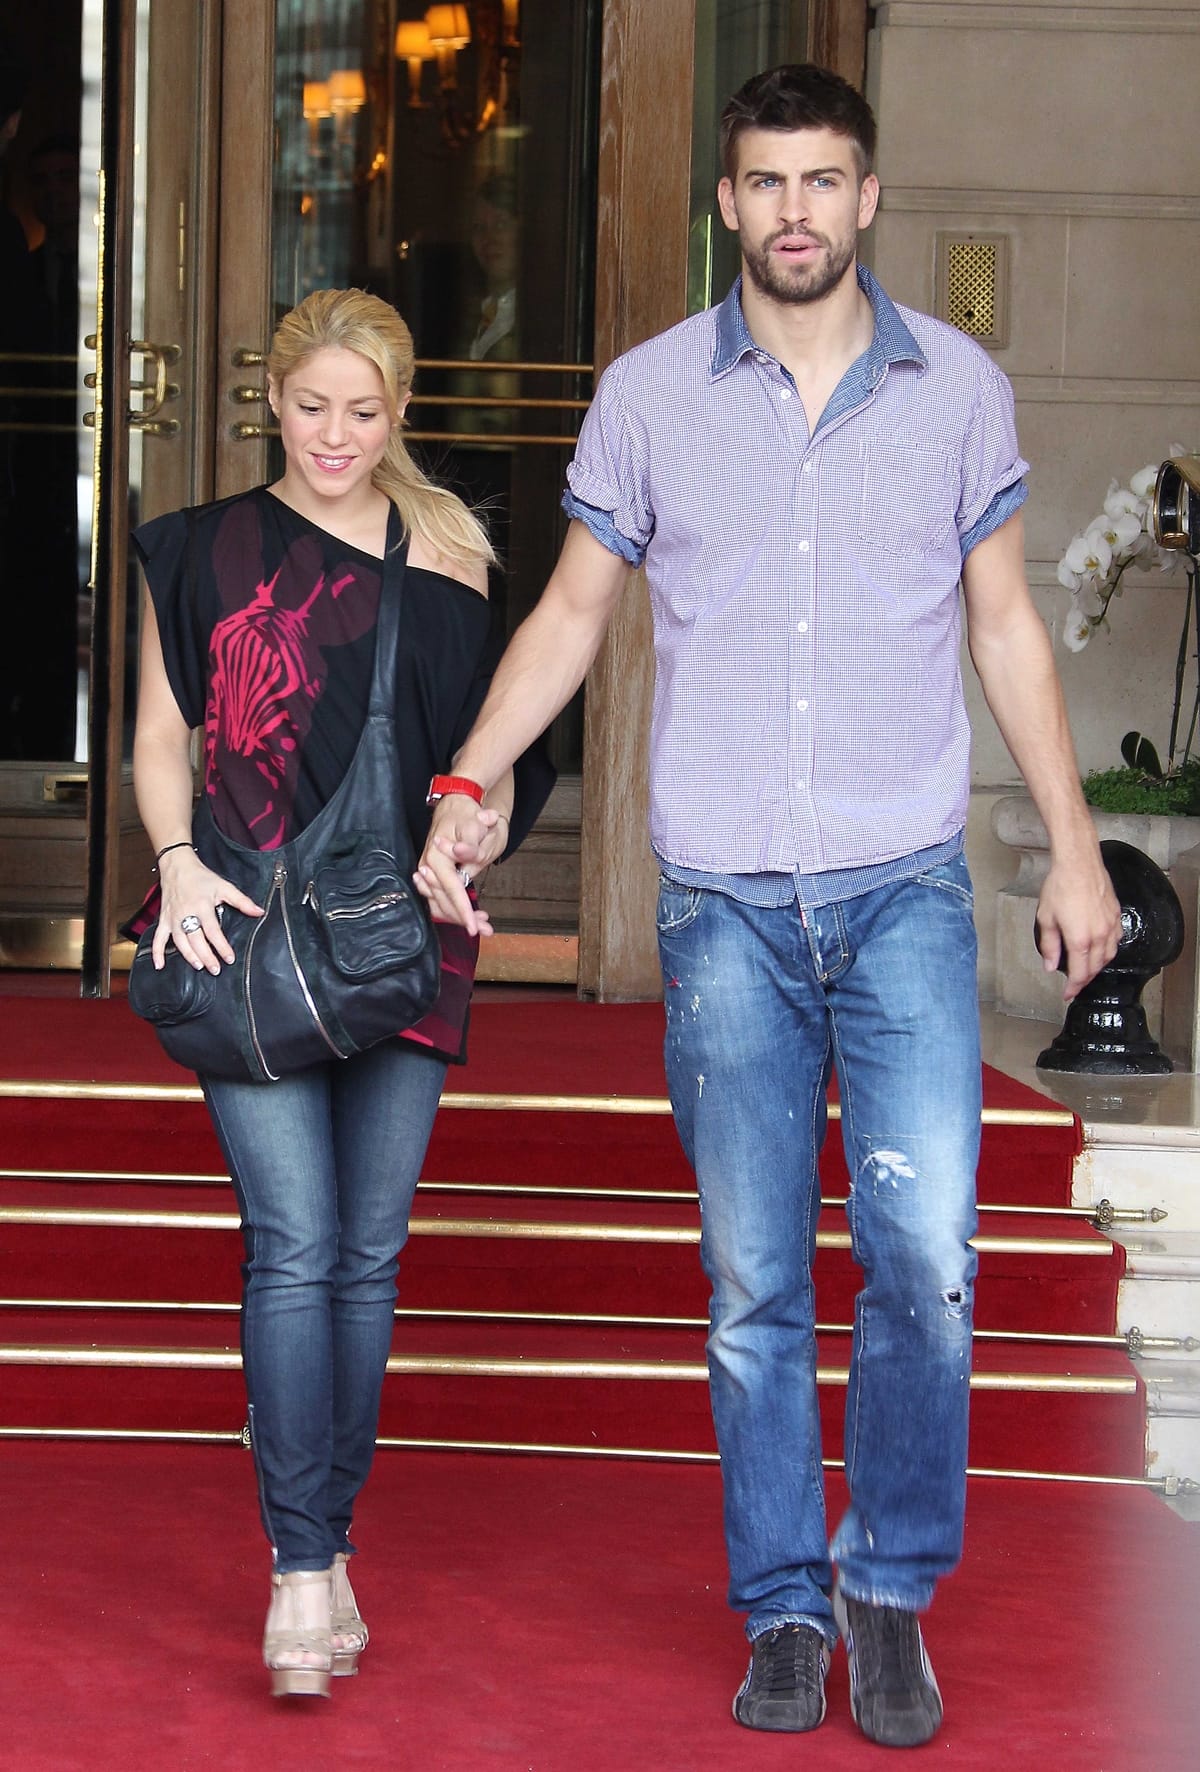 Shakira and Gerard Piqué started dating in 2011 and are the parents of two sons